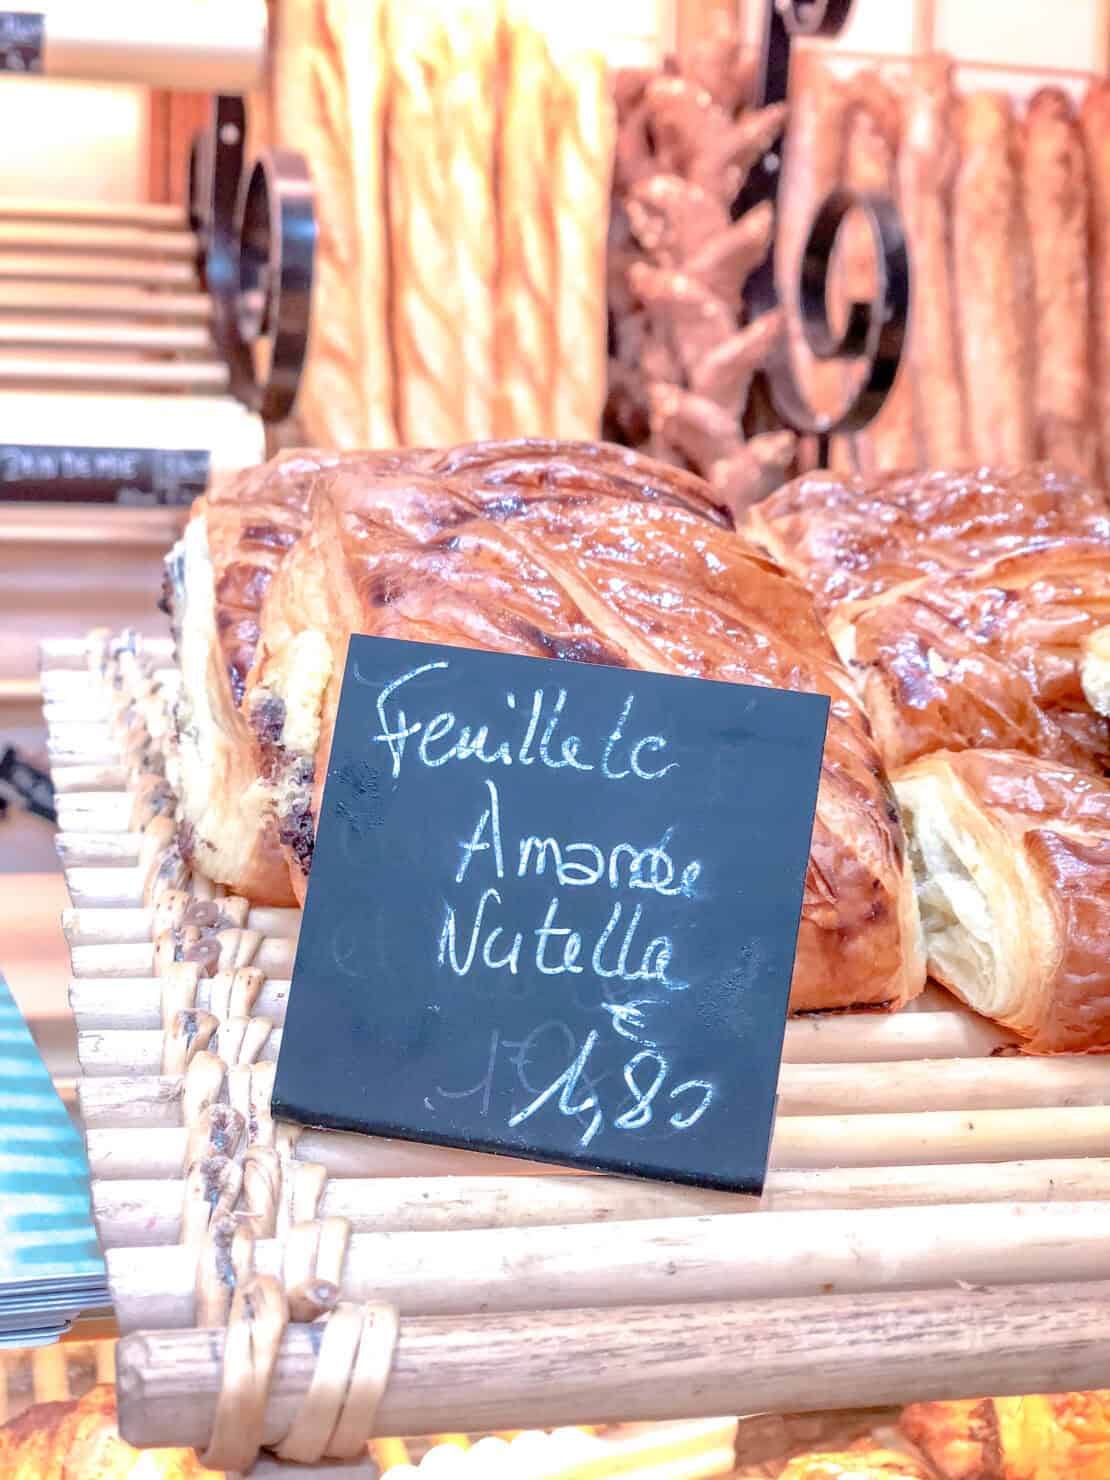 Hand written sign in French selling pastries and baguettes in Paris